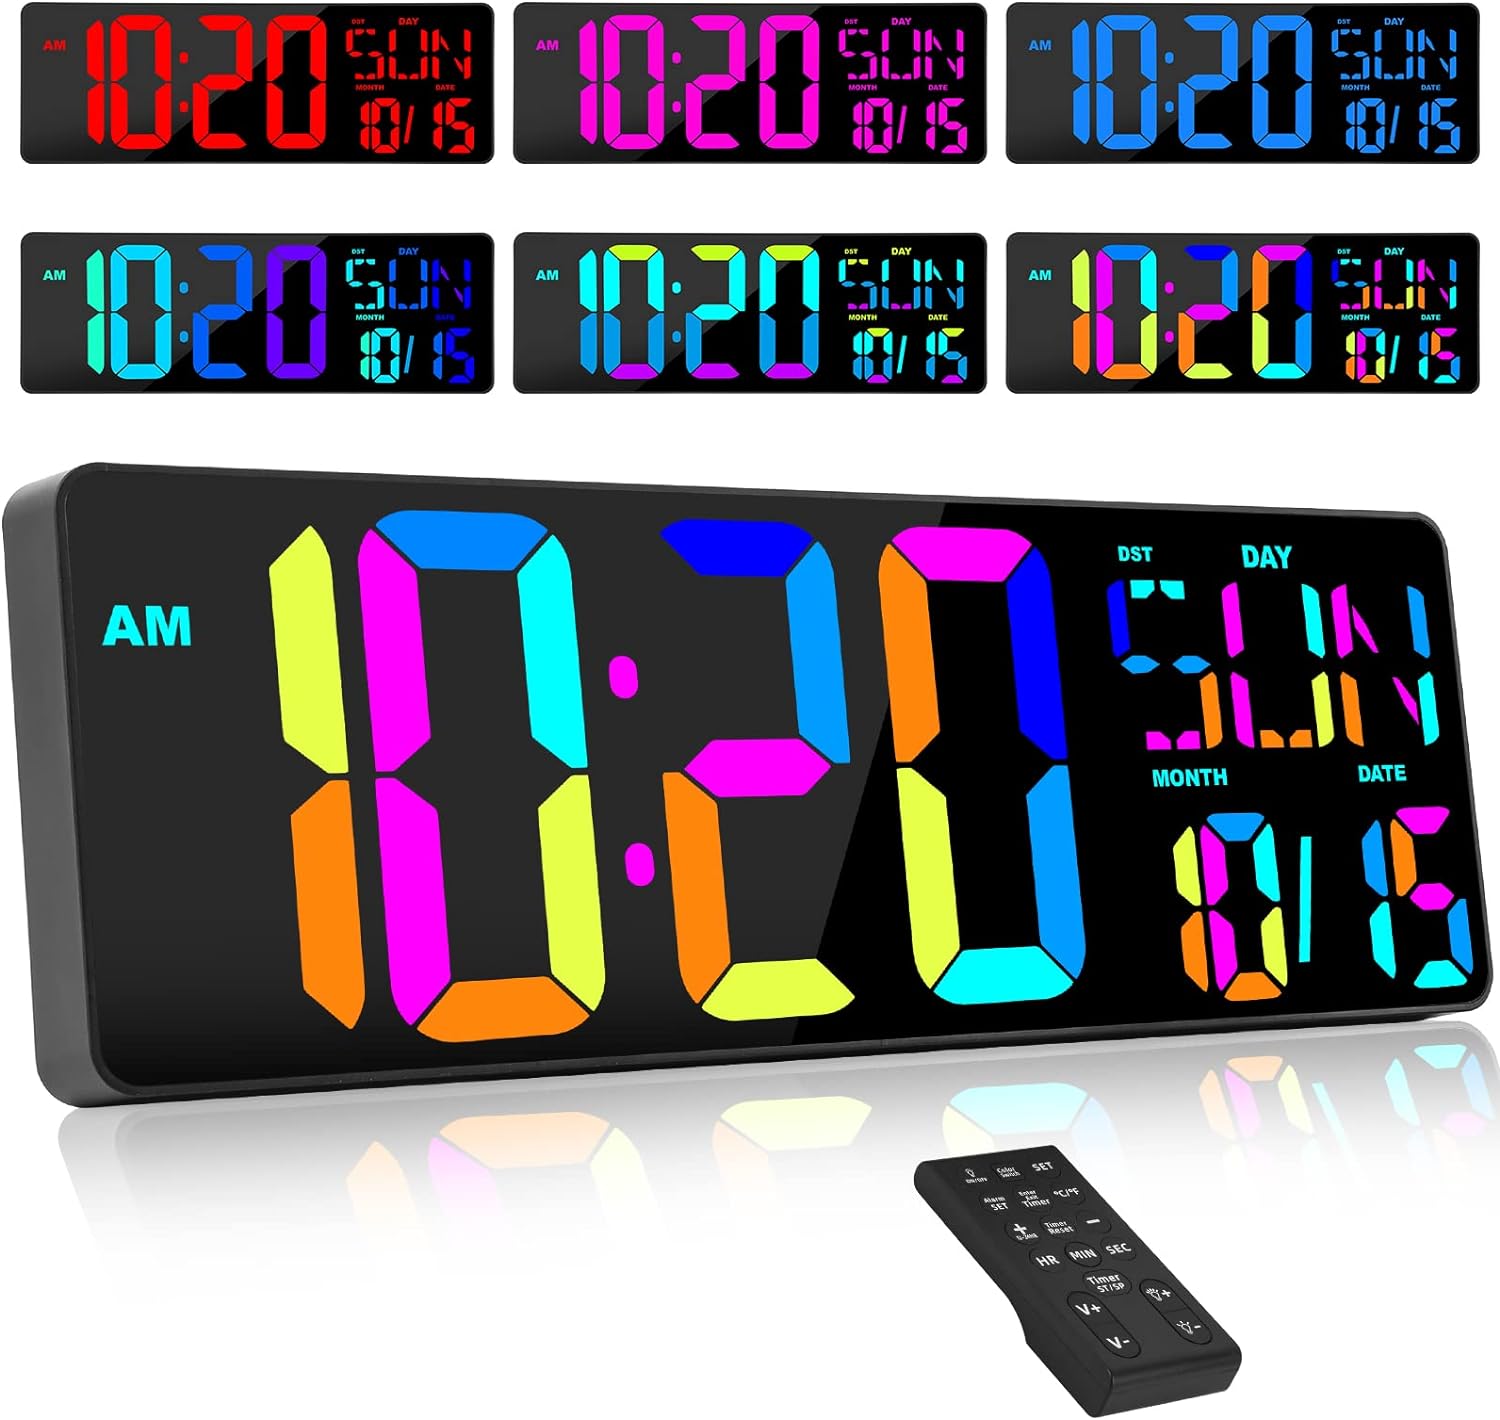 XREXS Large Digital Wall Clock with Remote Control, 17 Inch LED Large Display Count Up & Down Timer, Adjustable Brightness RGB Color Changing Clock Alarm Clock for Home, Gym, Office and Classroom